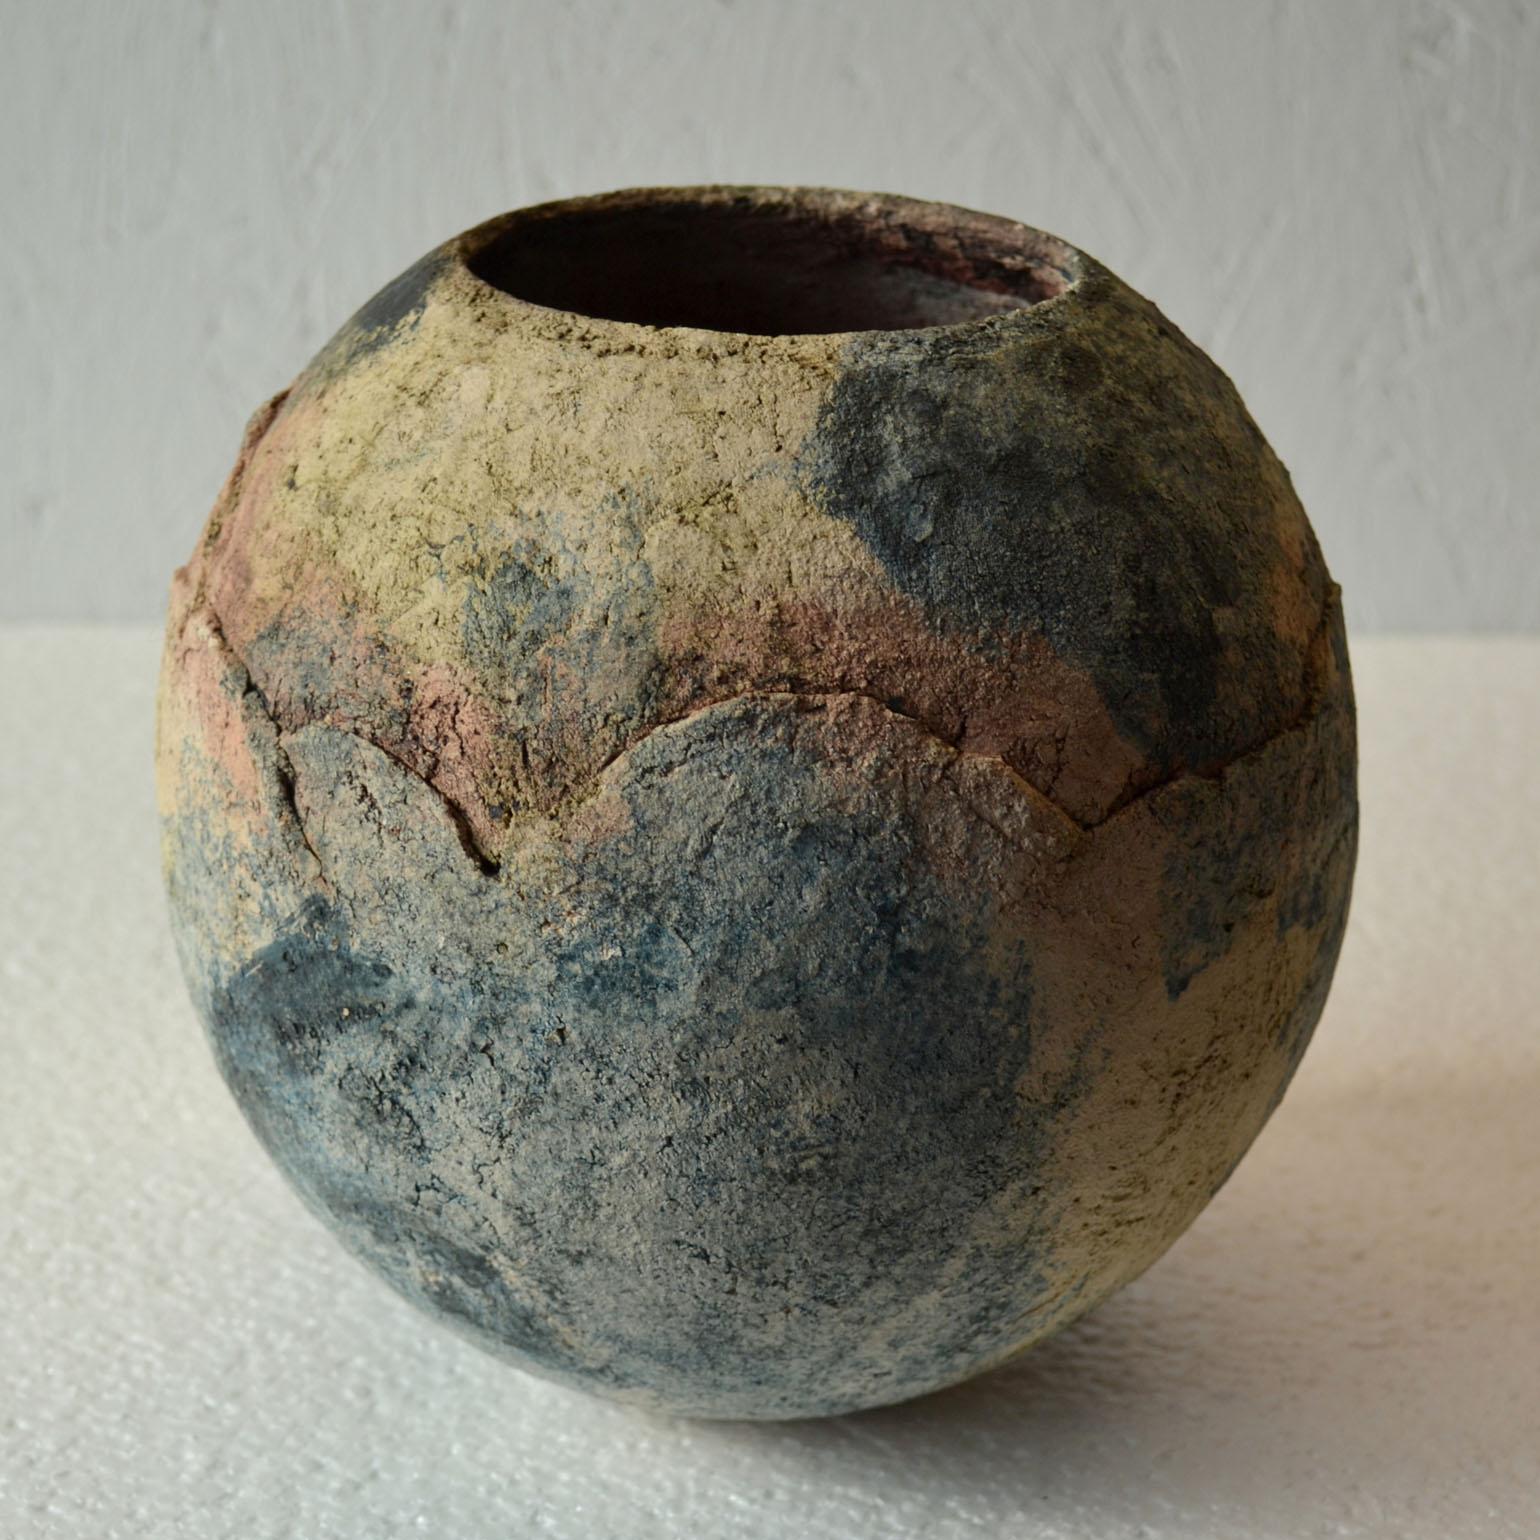 Rough textured ball shape Studio Pottery vase looks lithe the surface of the moon in dark pastel tones. The vase is hand formed with pigmented clay, Dutch, 1980s.